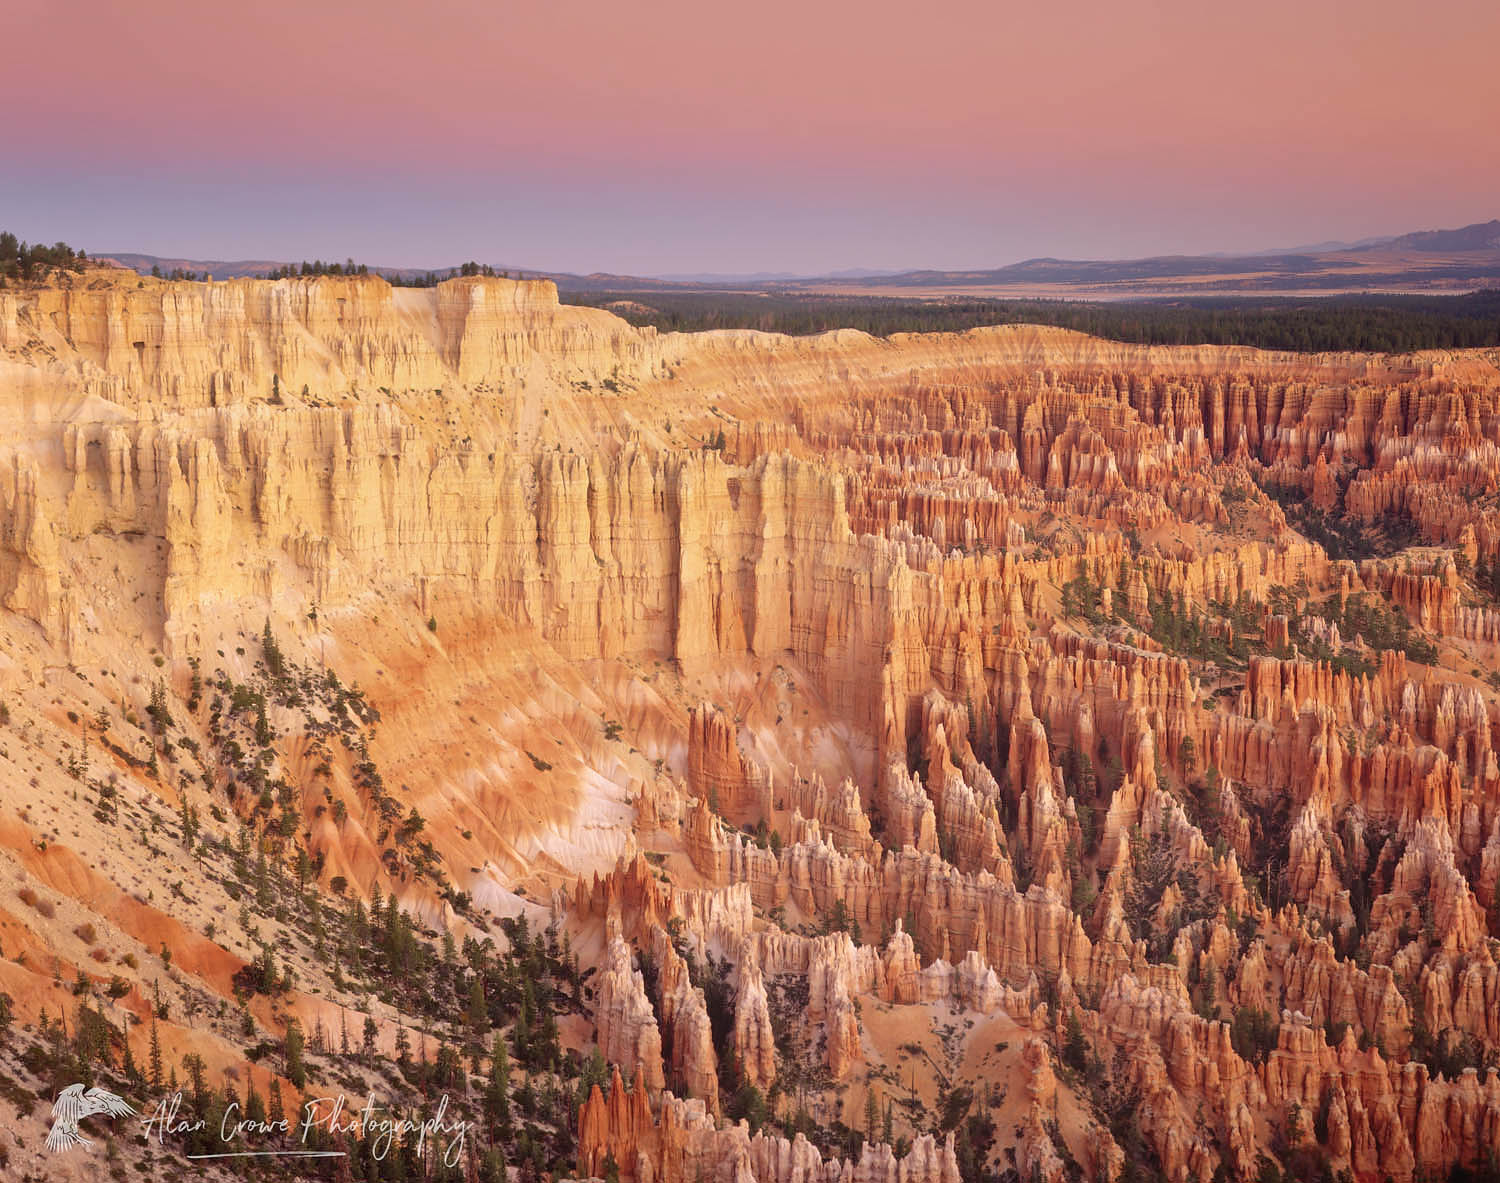 Pre-dawn glow over Bryce Canyon from canyon rim, Bryce Canyon National Park Utah #6062